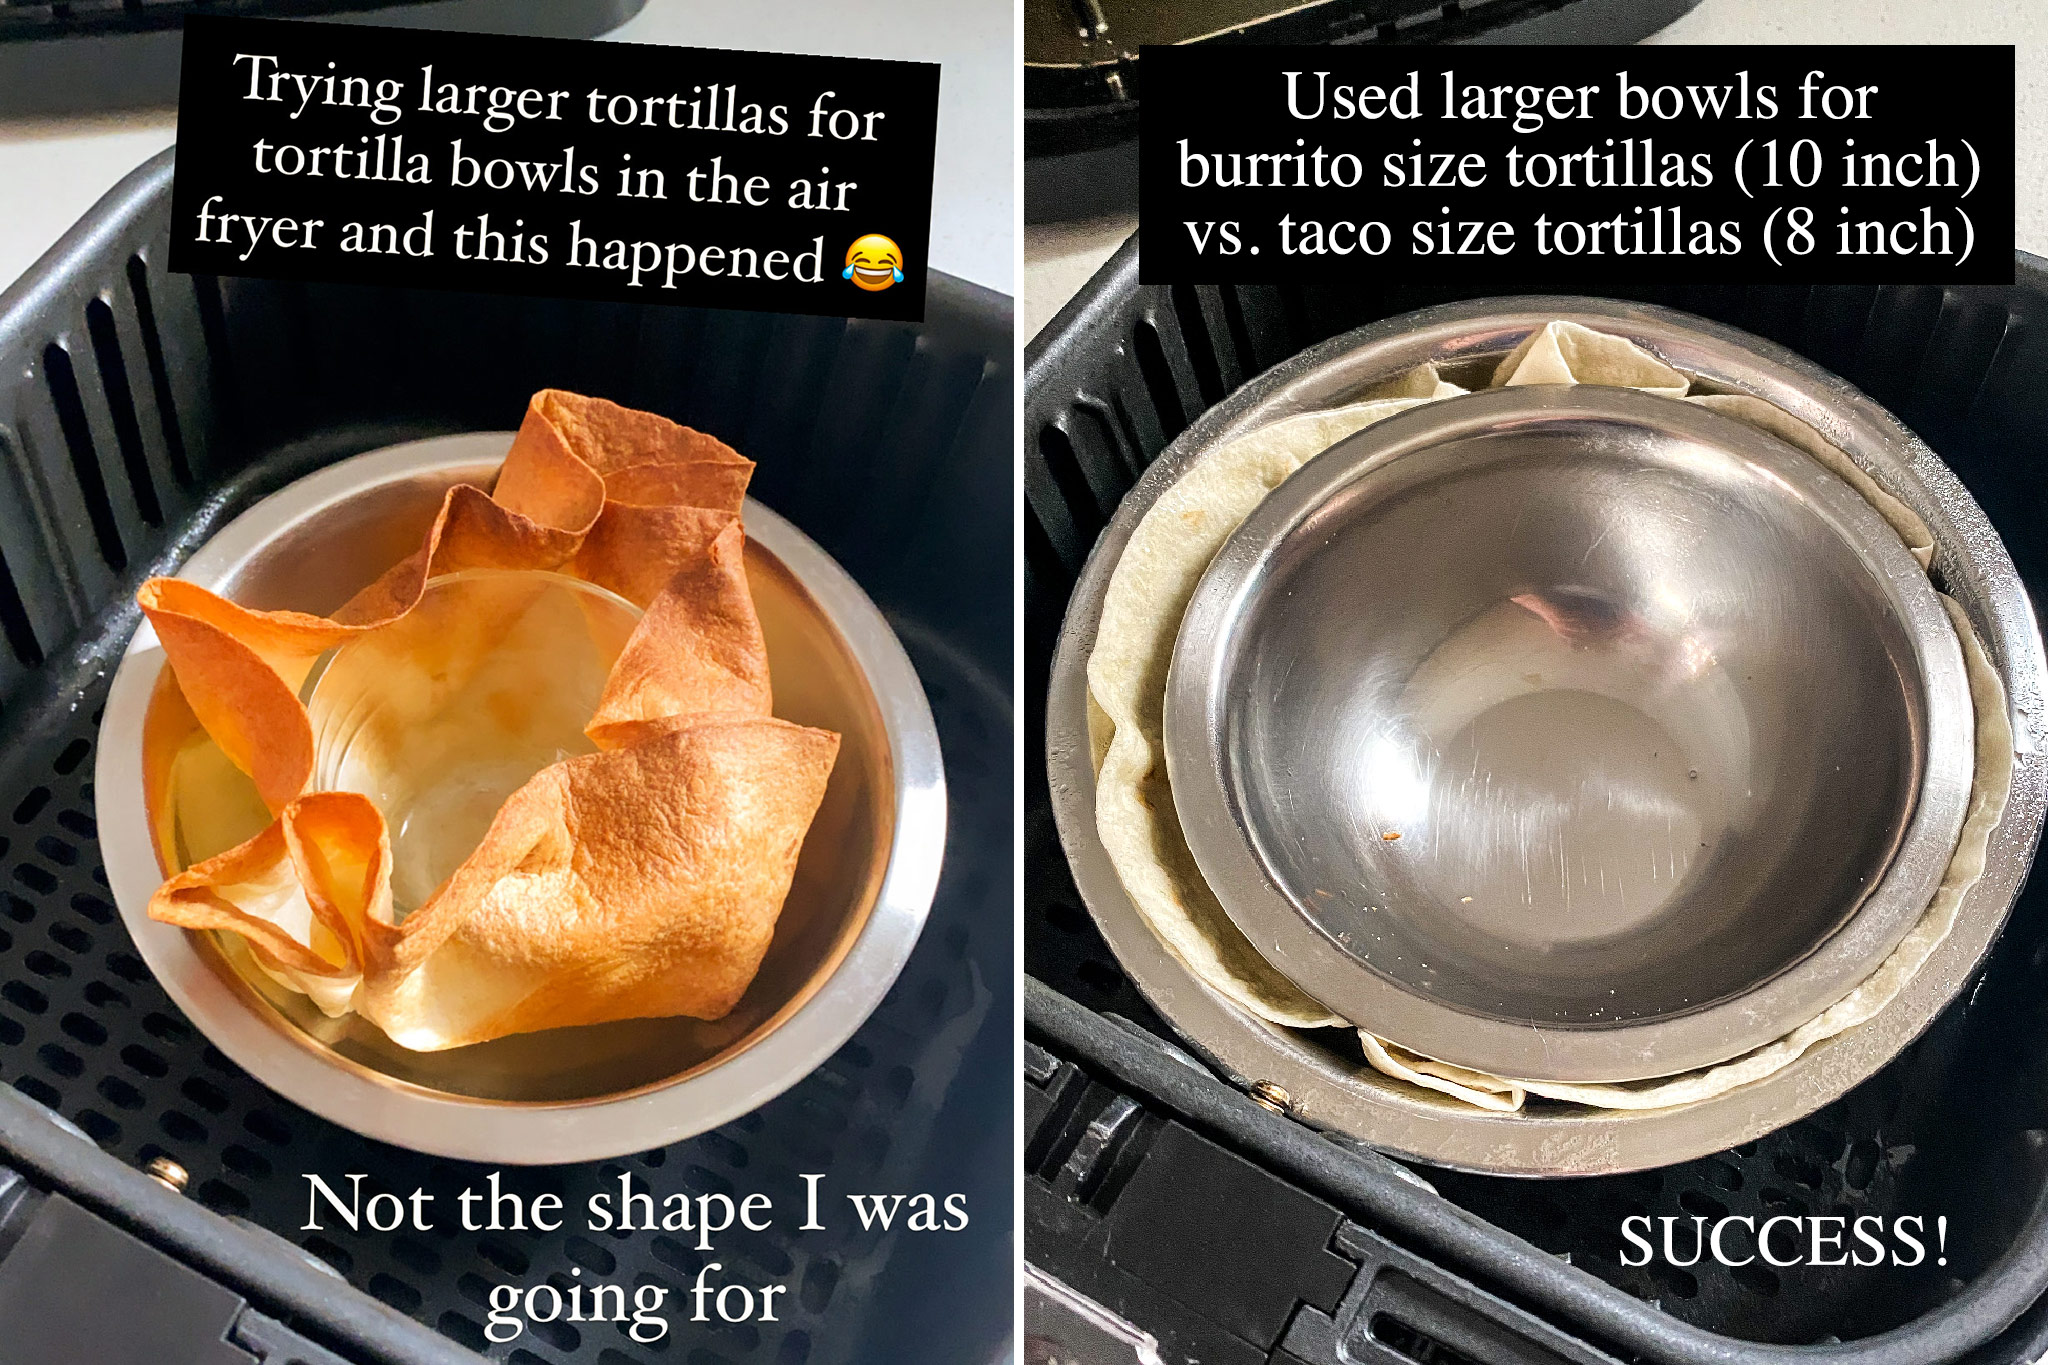 a test using a large burrito size tortilla in an air fryer